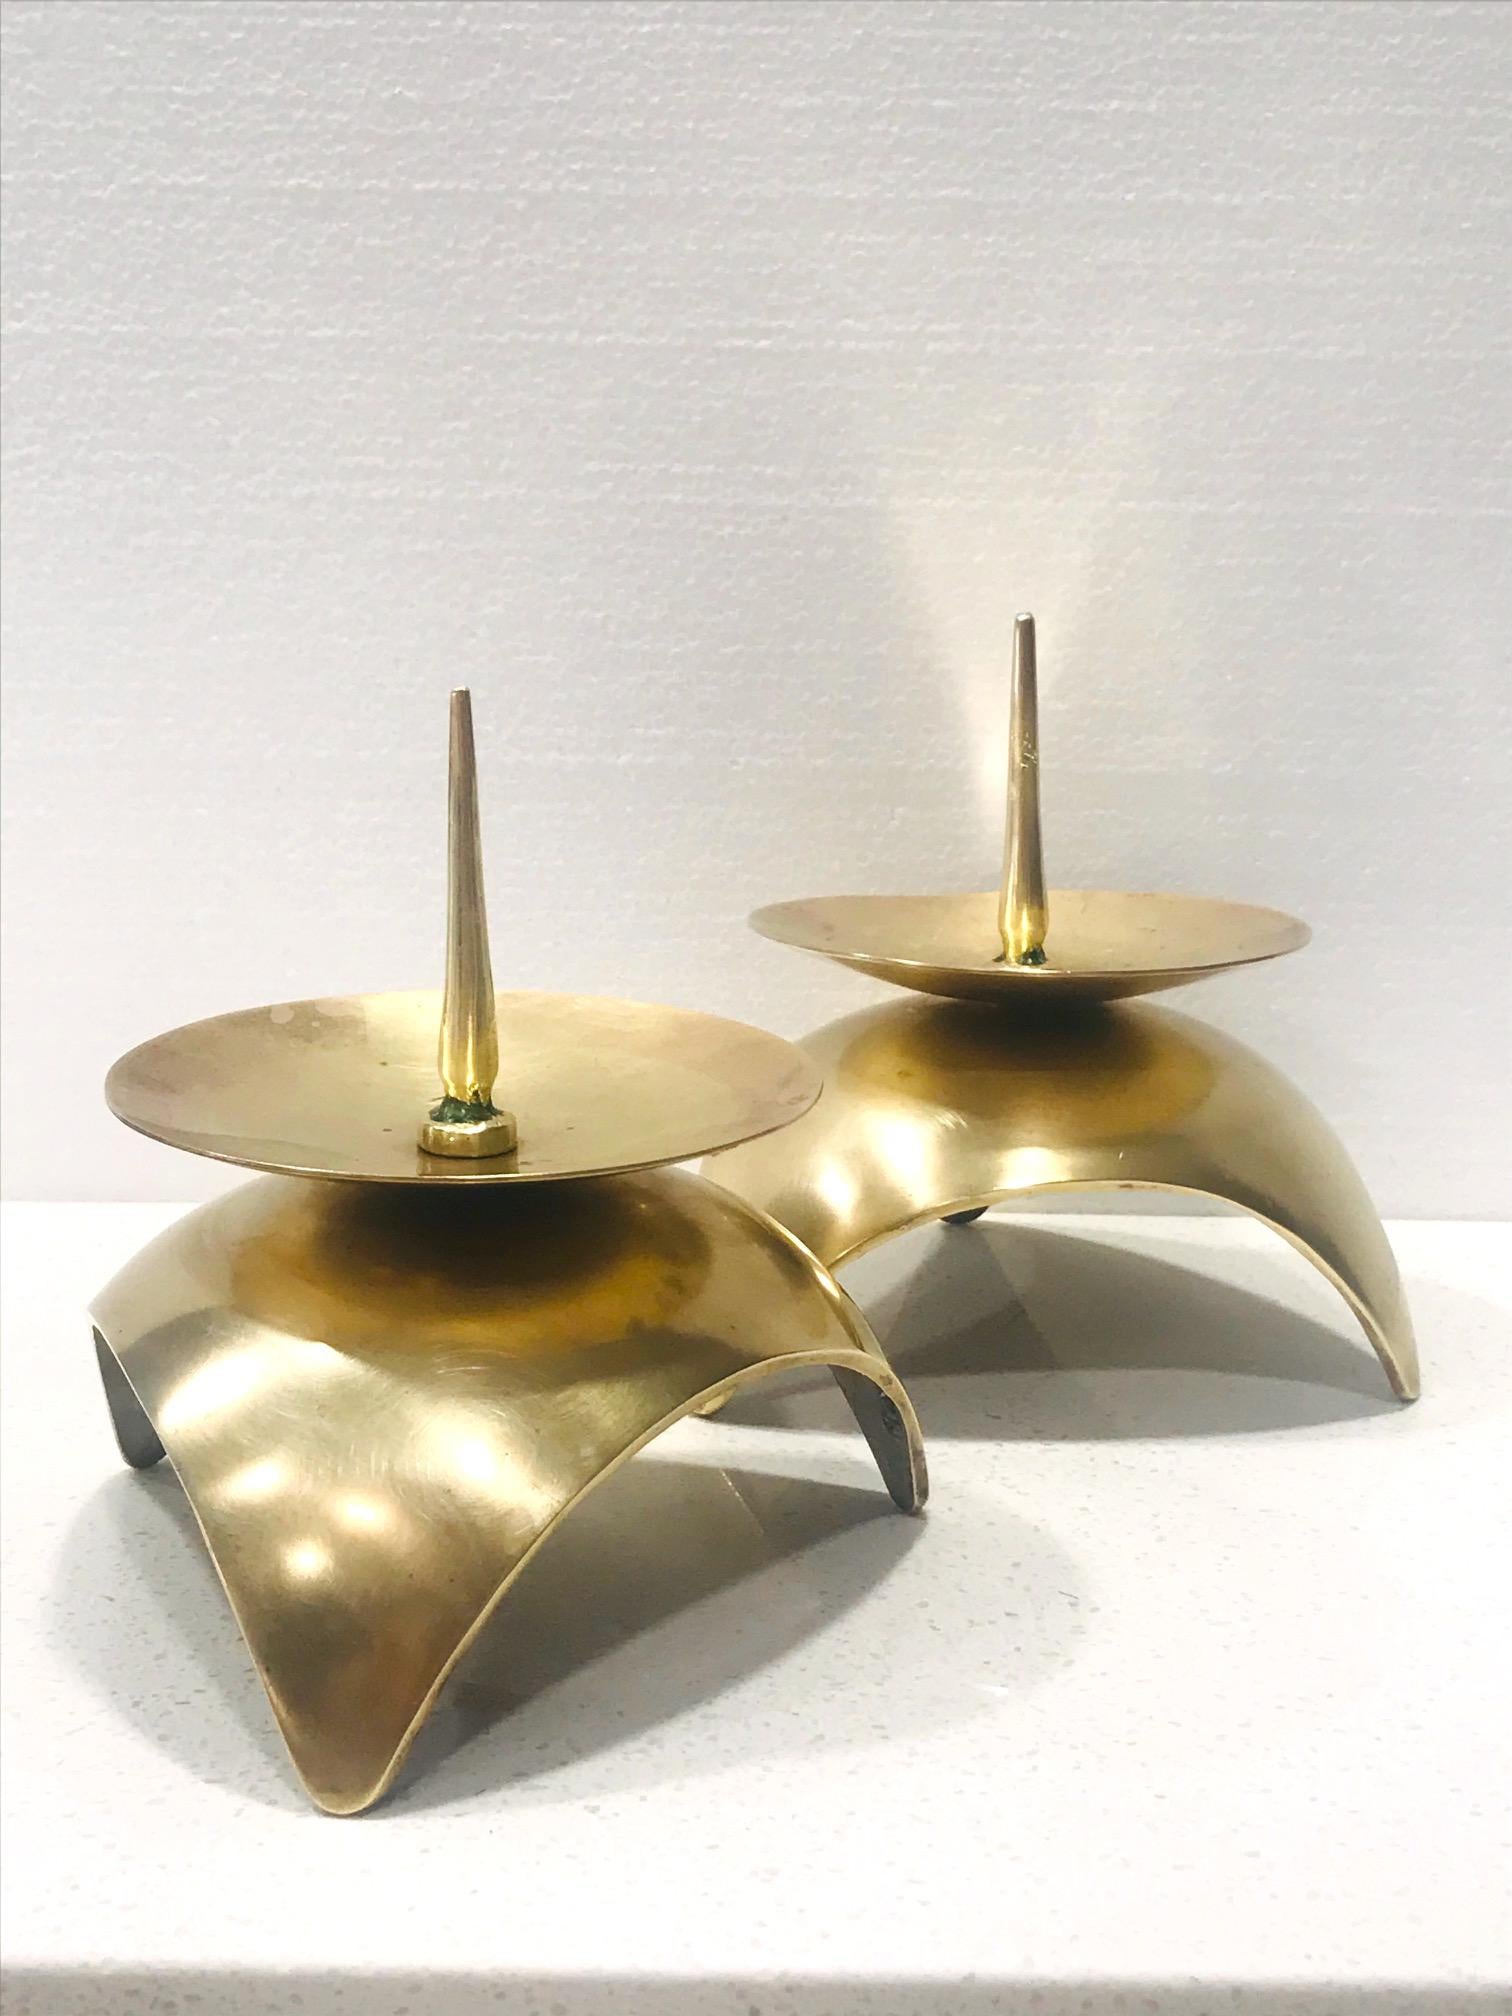 Hand-Crafted Mid-Century Modern Brutalist Japanese Candleholders in Solid Brass, circa 1960s